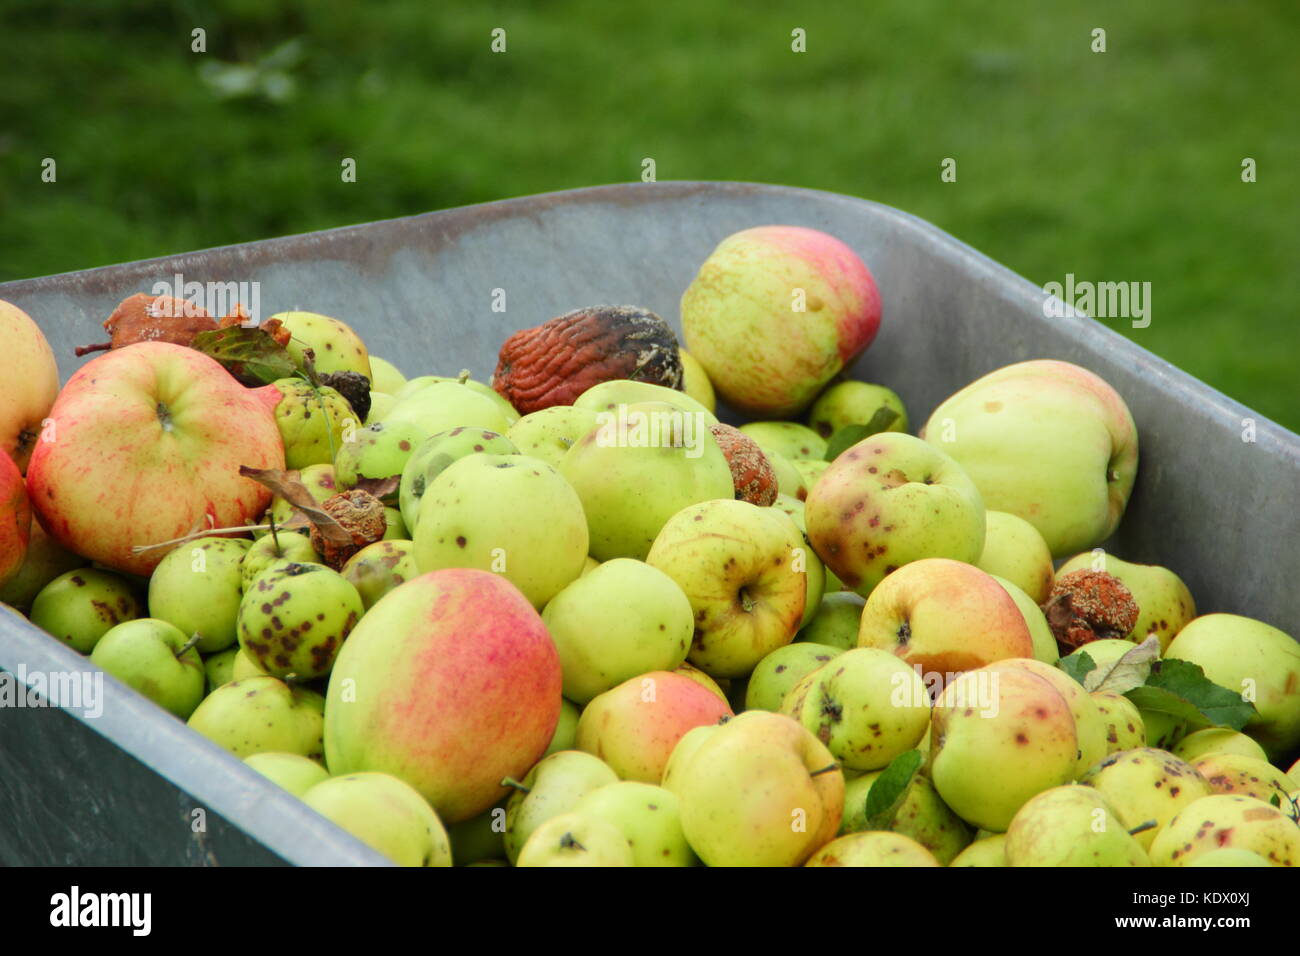 Diseased apples suffering scab and brown rot (molinia laxa) gathered into a wheelbarrow for disposal to discourage fungal spread in an English orchard Stock Photo